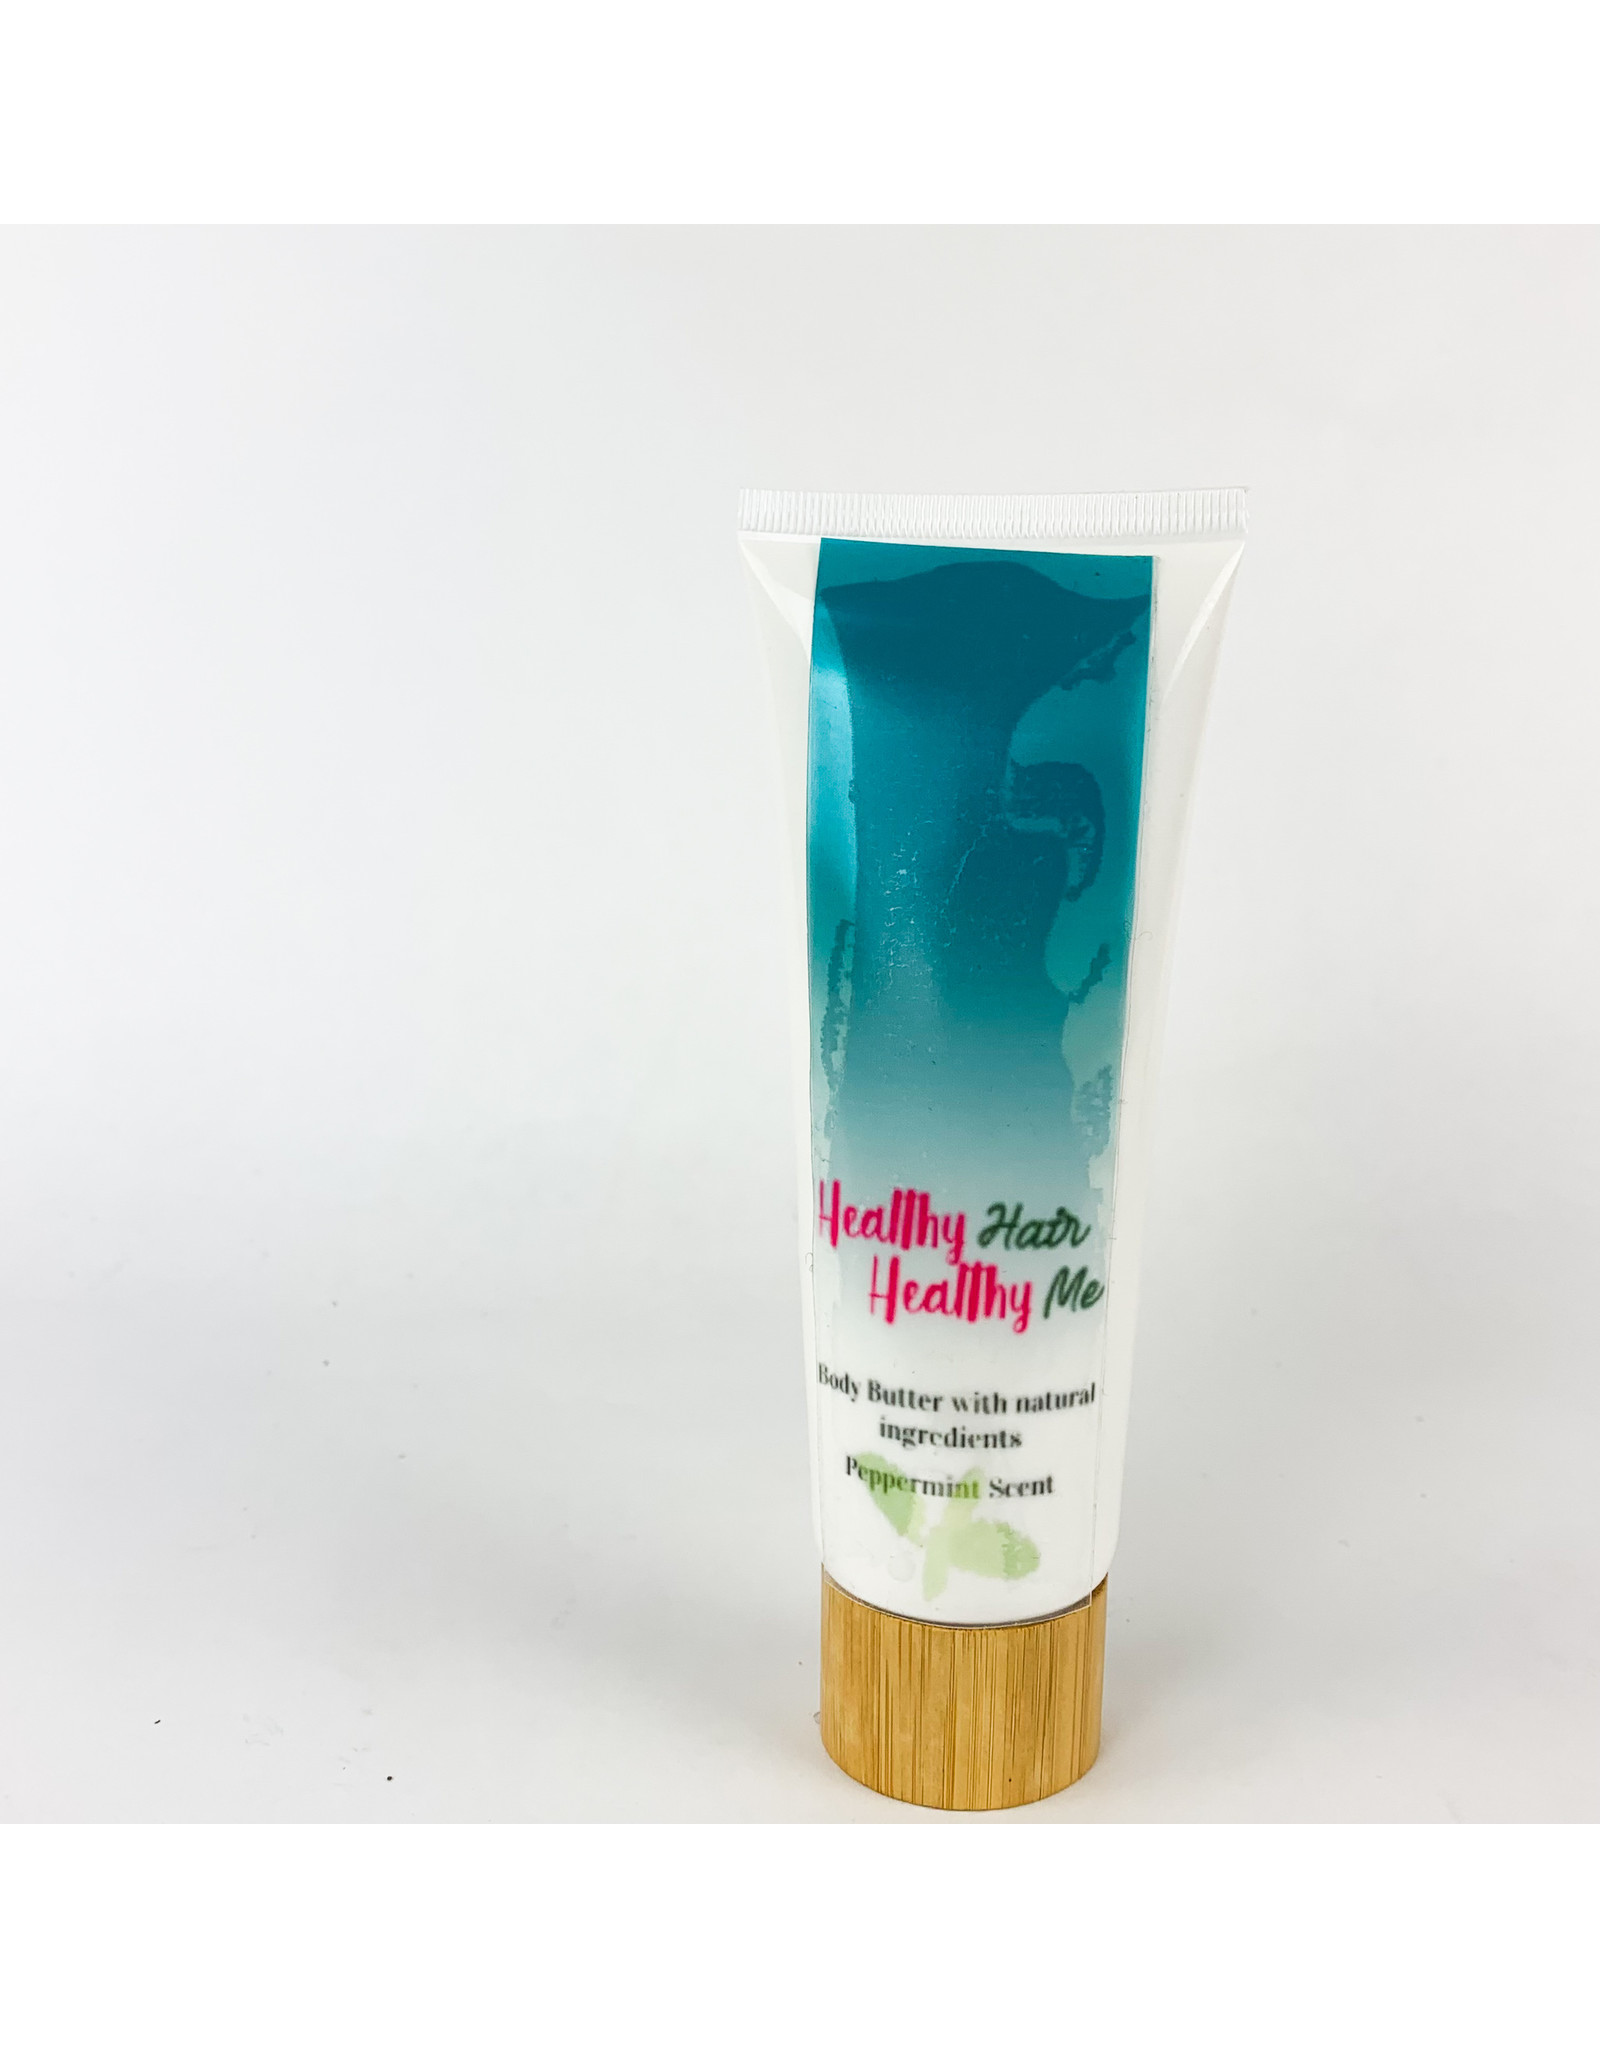 Healthy Hair Healthy Me Body Butter - Peppermint Scent